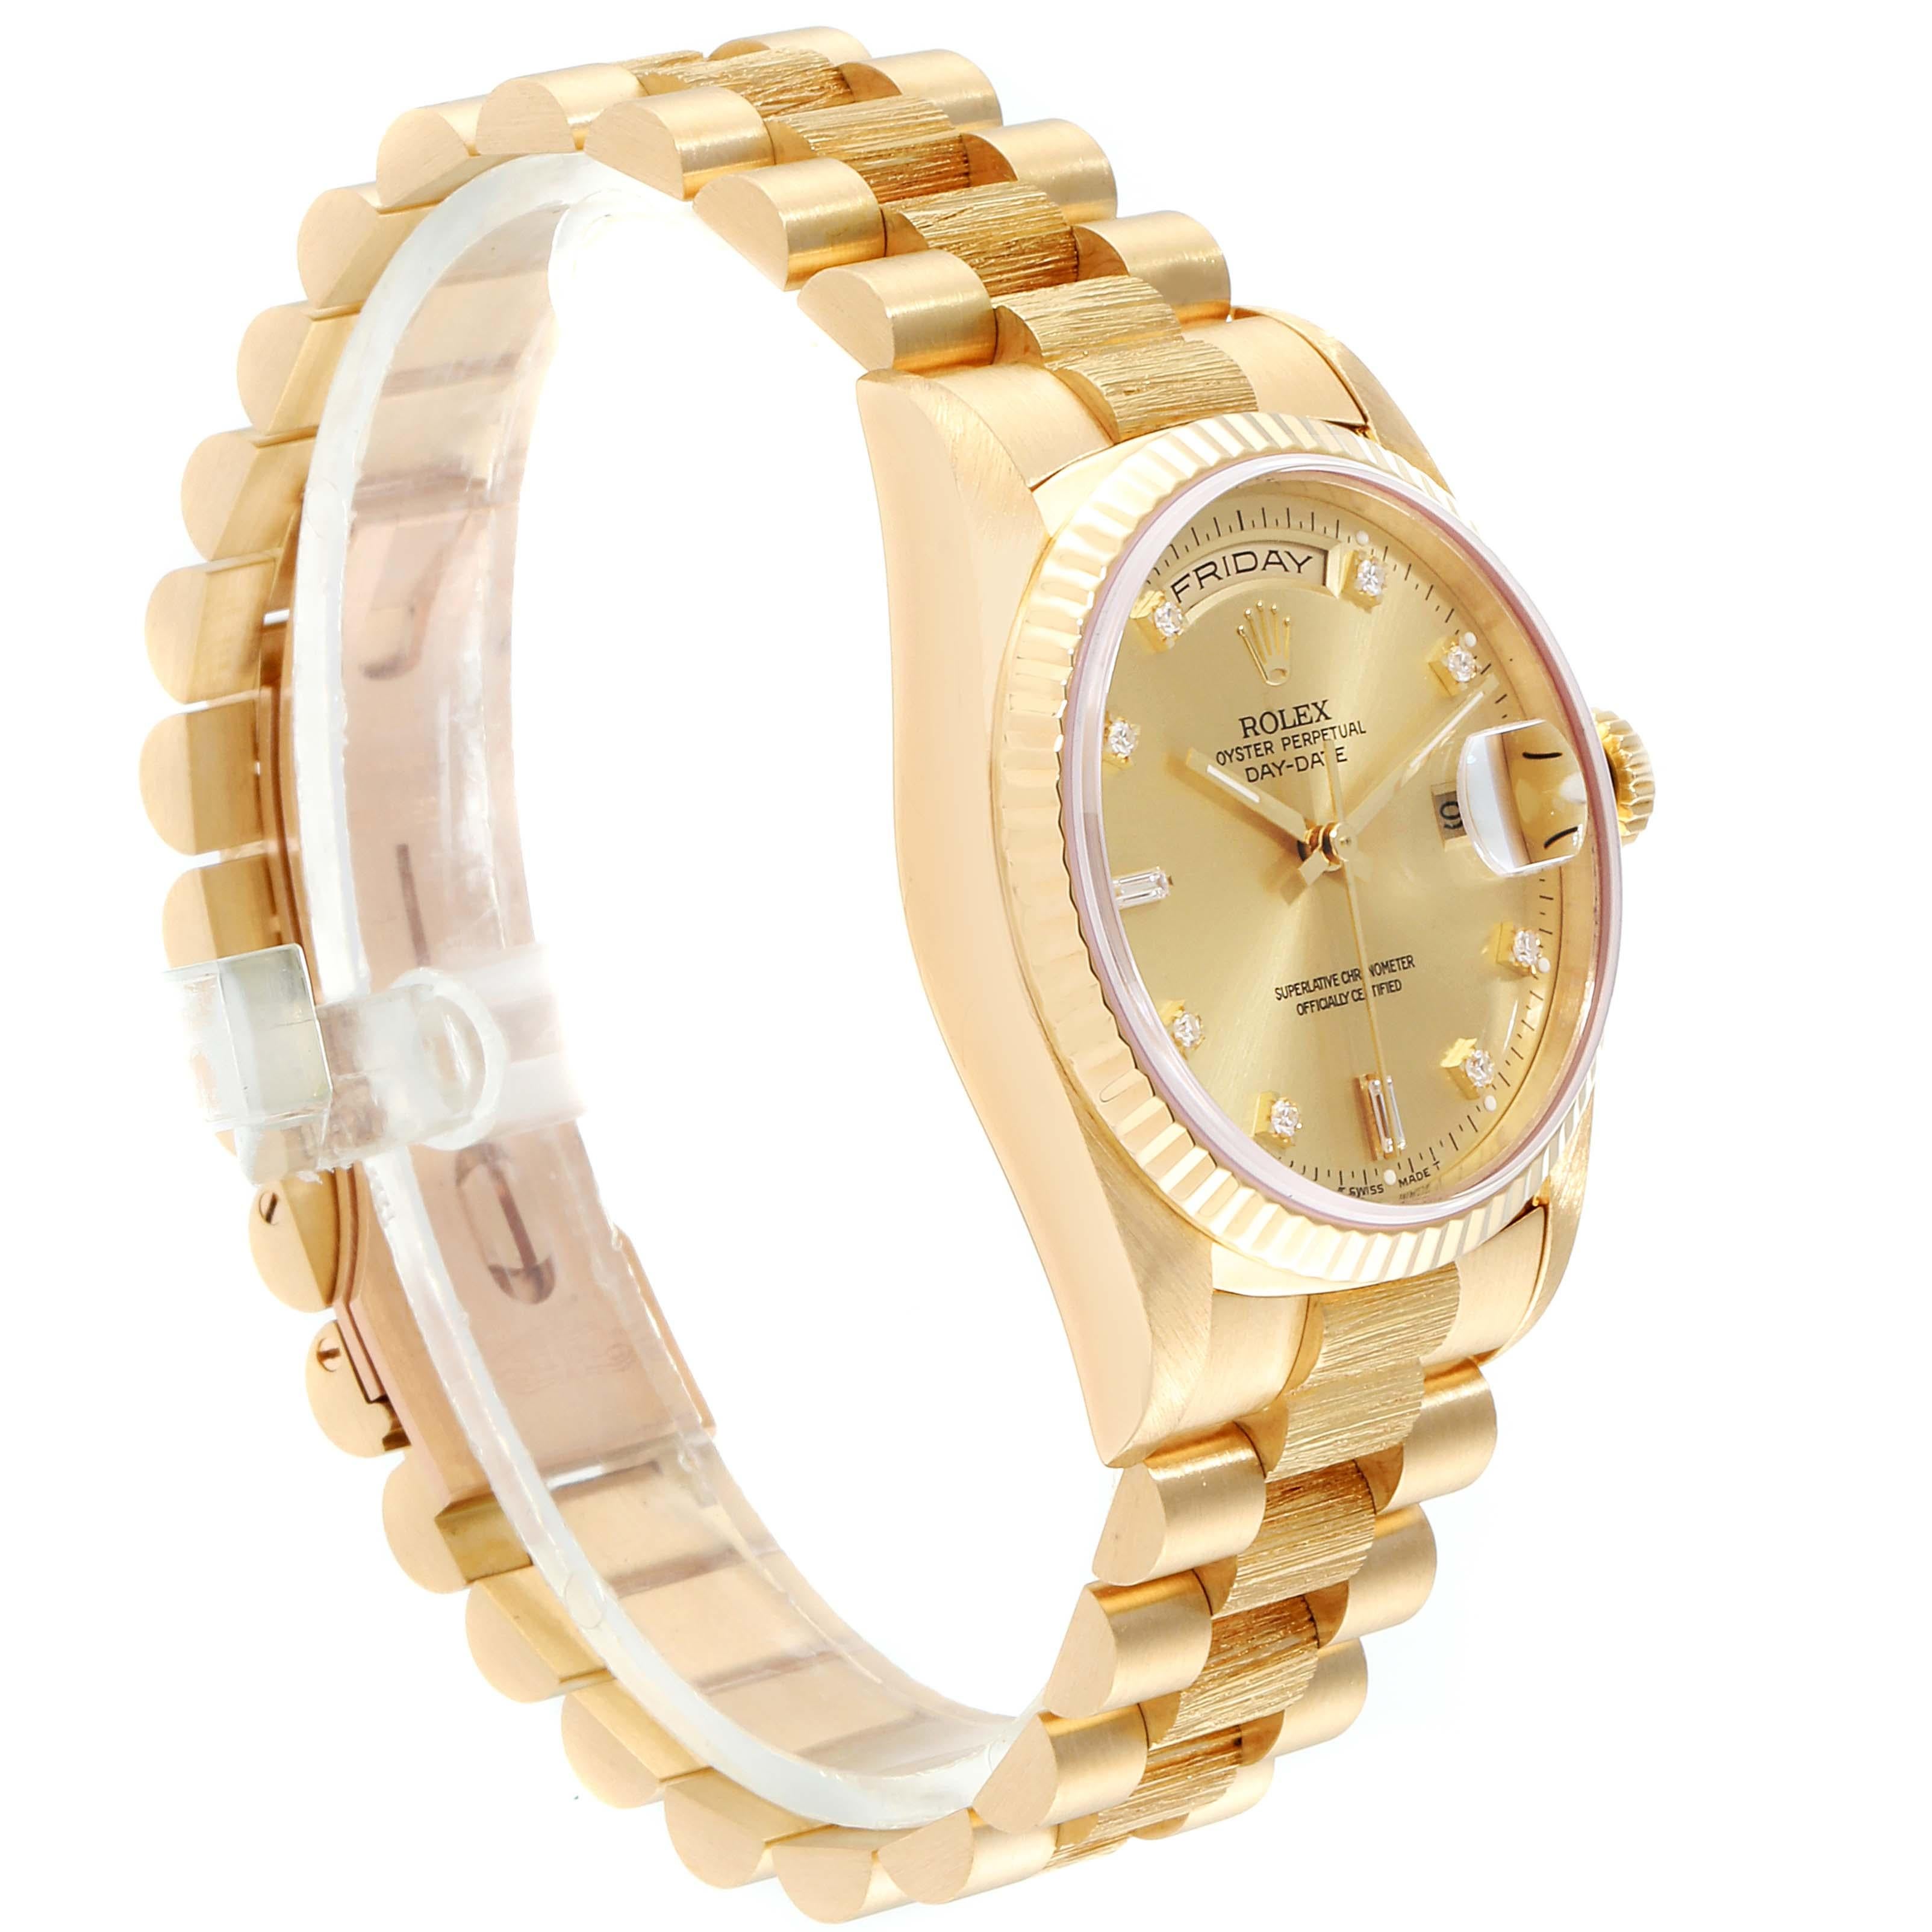 Rolex President Day-Date Yellow Gold Diamond Men's Watch 18238 In Excellent Condition For Sale In Atlanta, GA